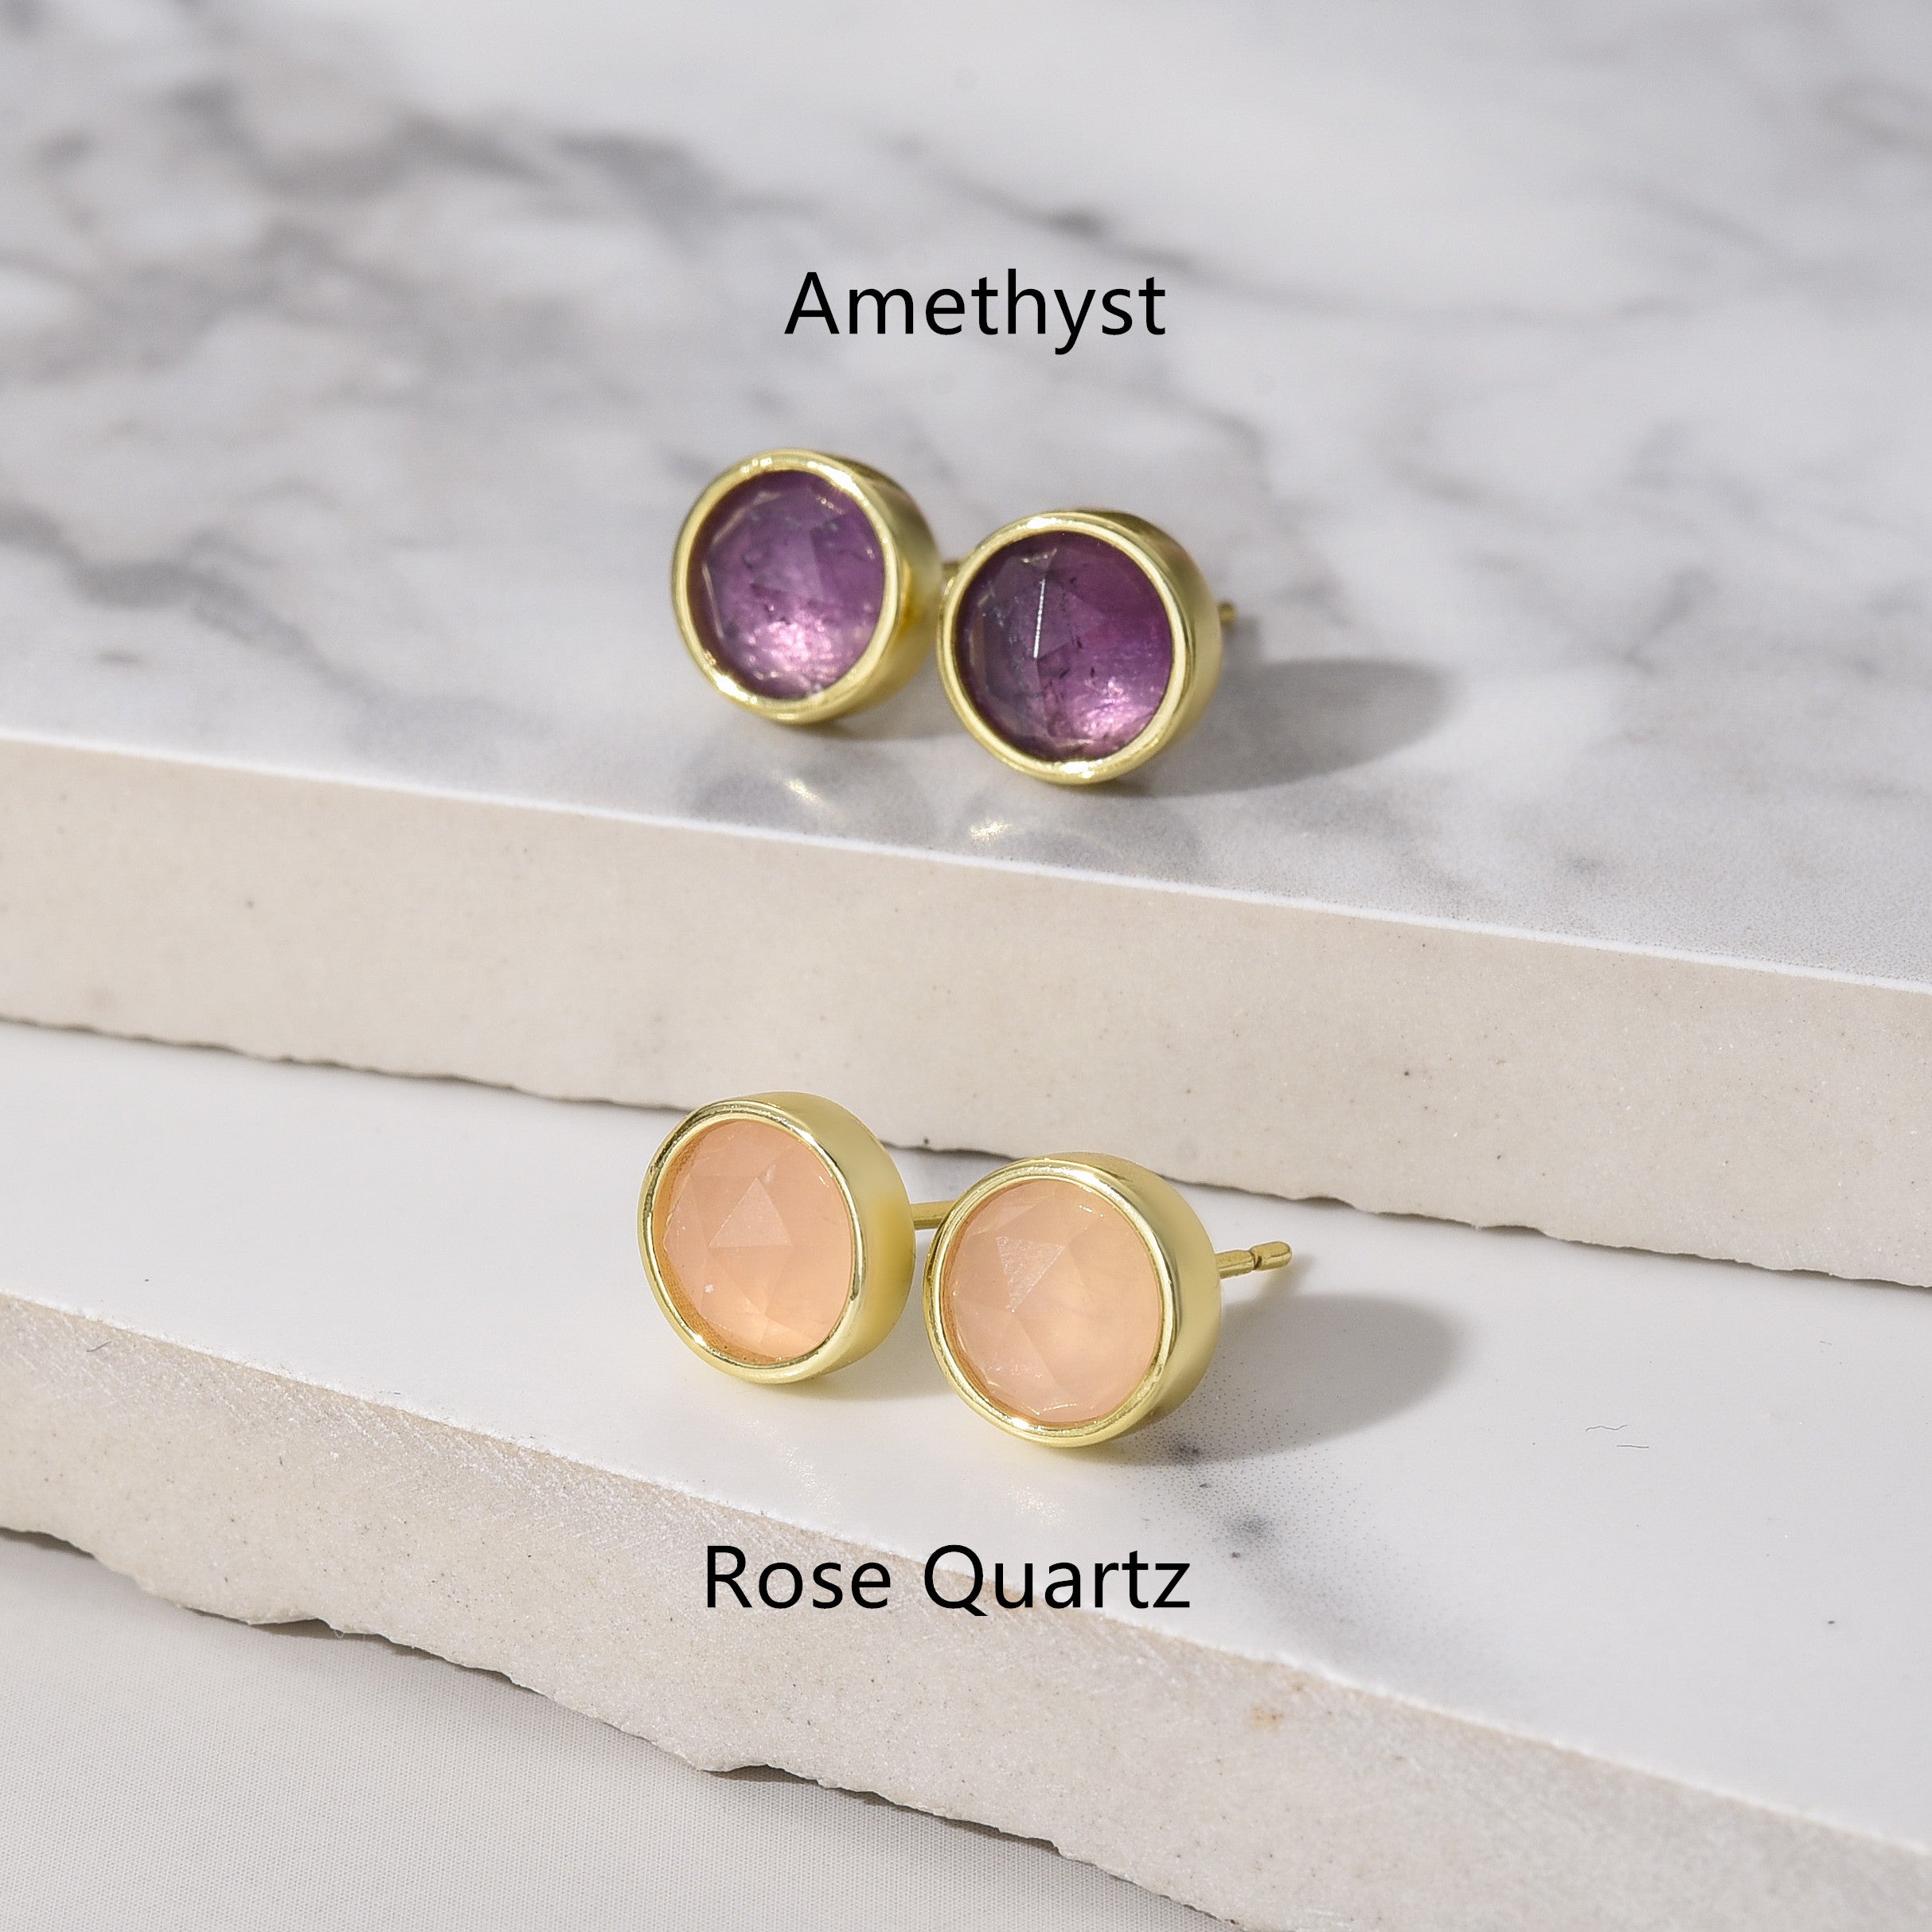 Gold Plated Round Faceted Gemstone Stud Earrings, Healing Crystal Stone Studs, Birthstone Earrings Jewelry BT024